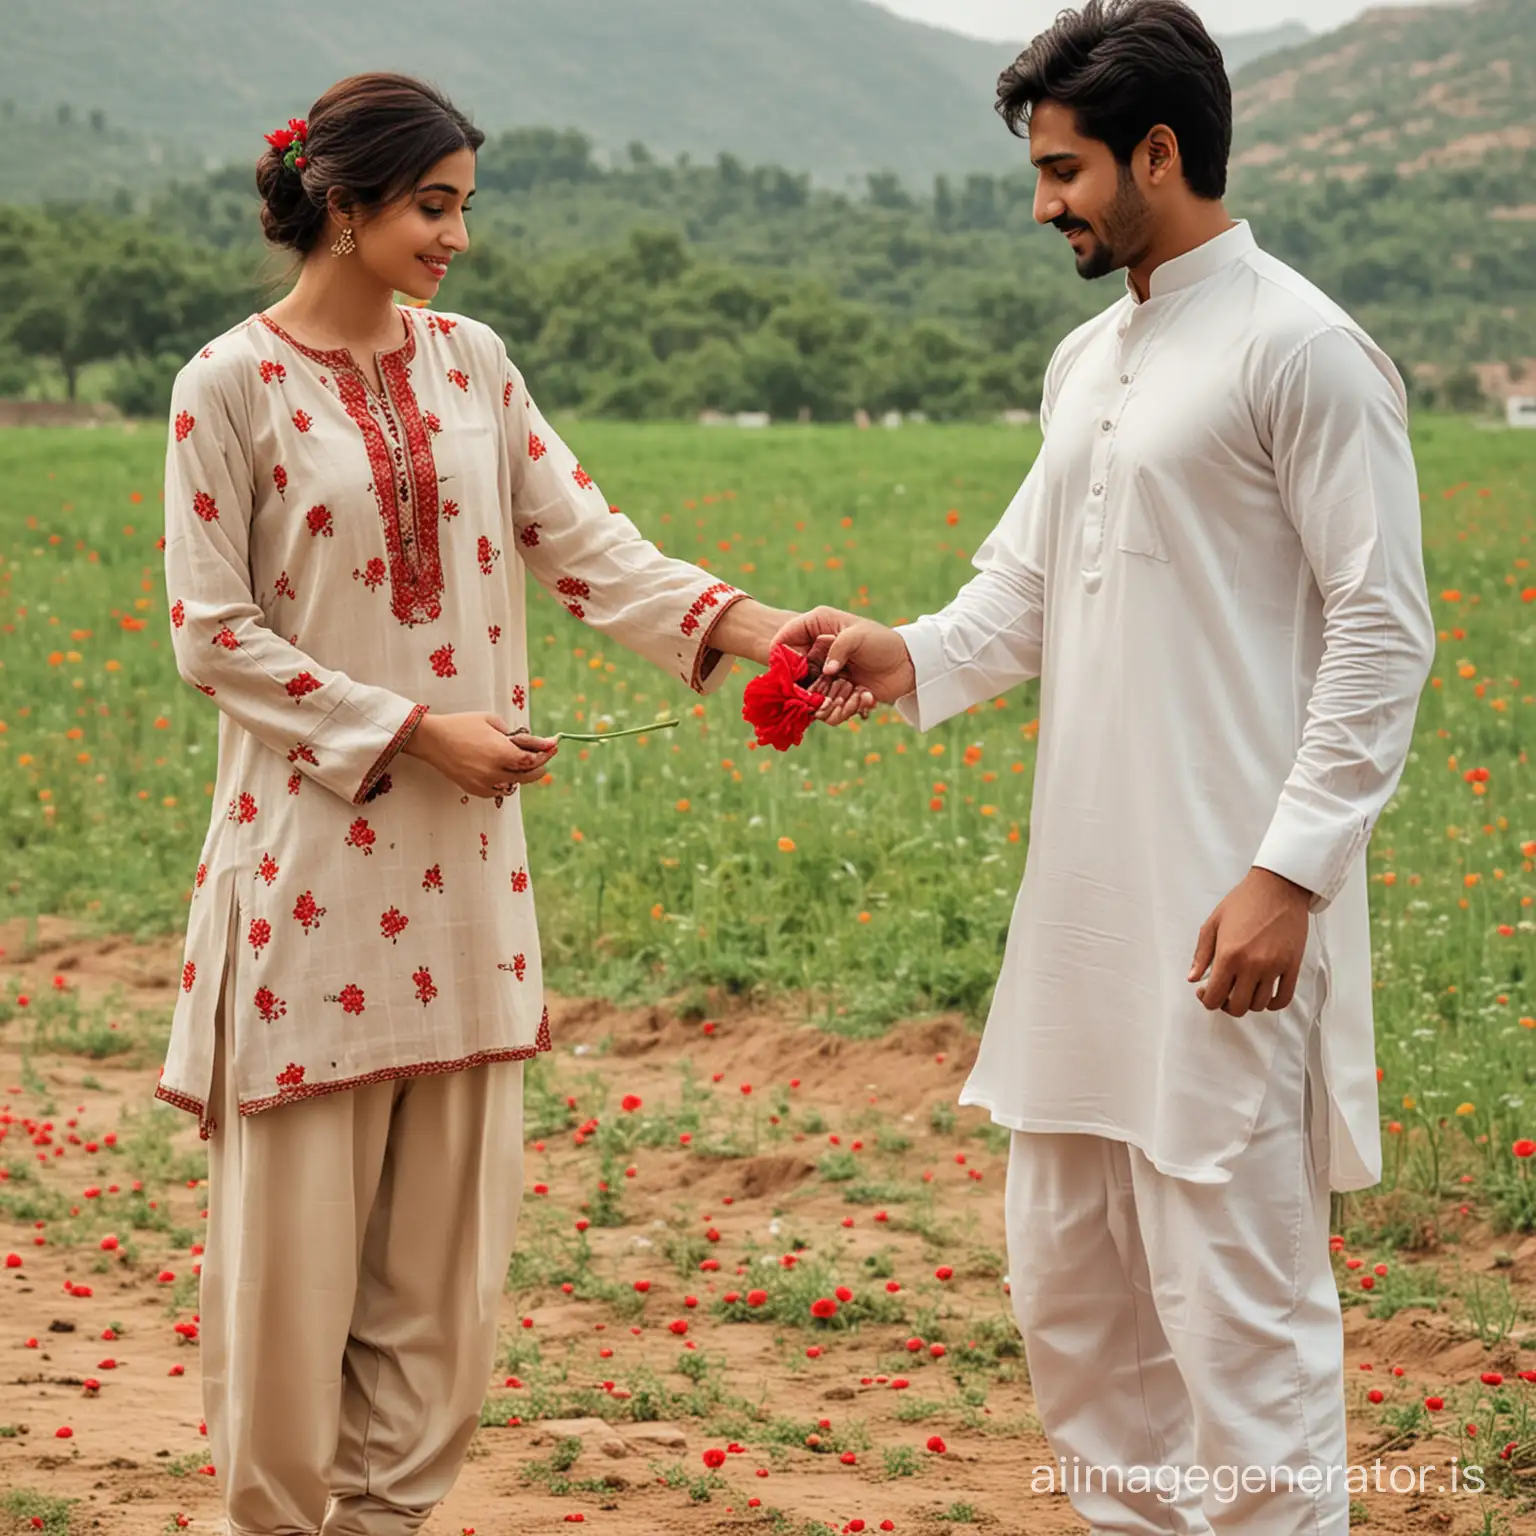 Man-in-Traditional-Shalwar-Qameez-Presents-Red-Flower-to-Beloved